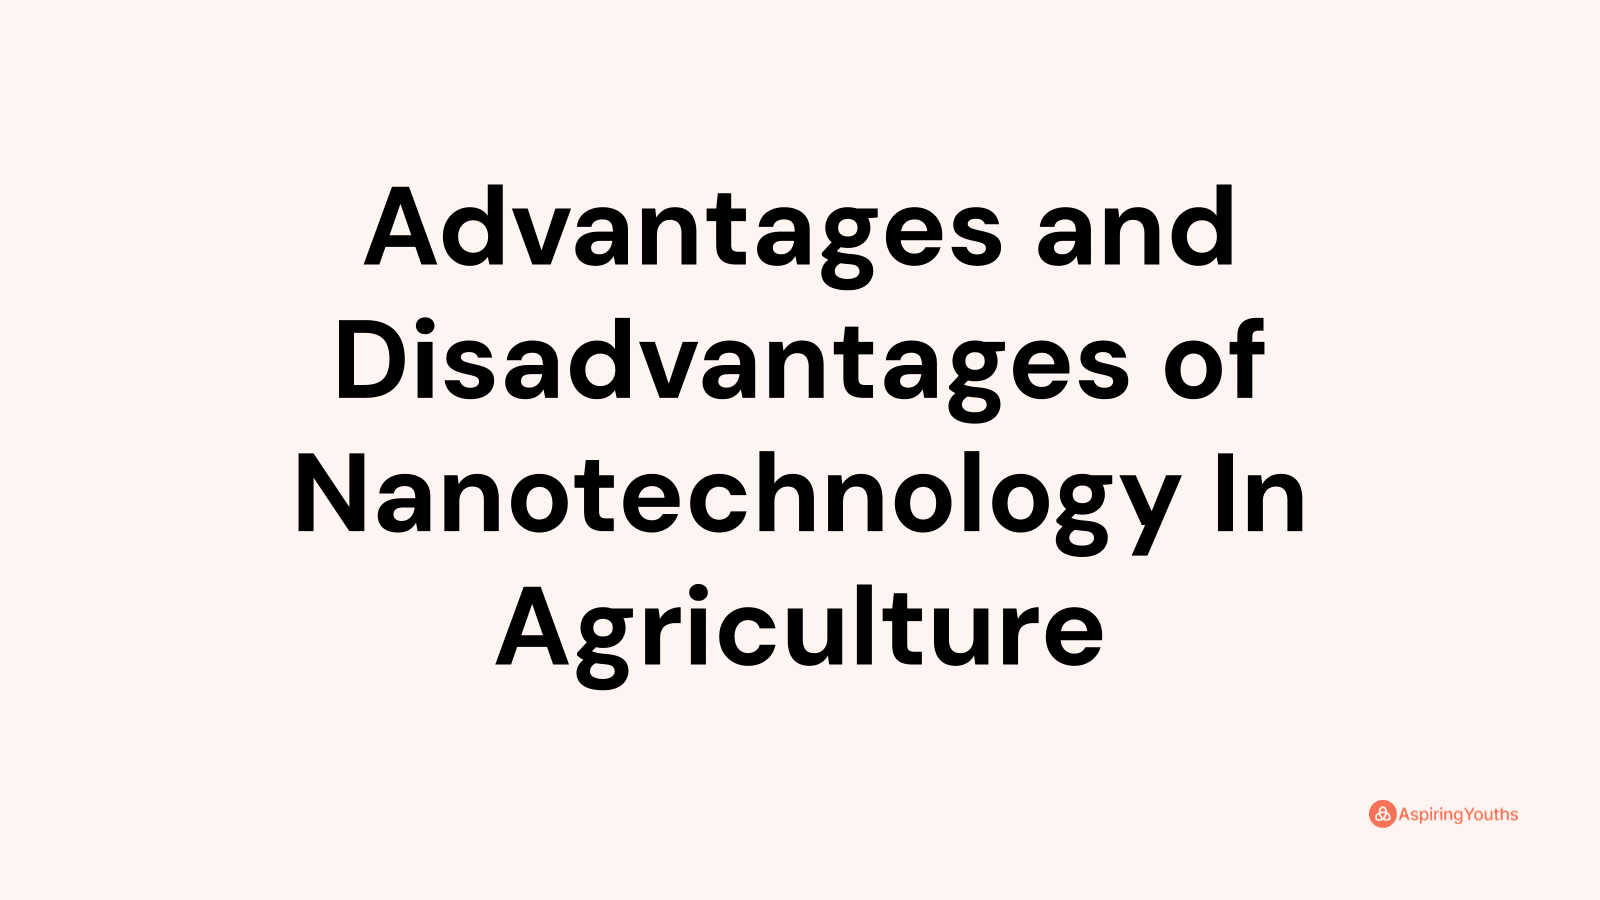 Advantages and disadvantages of Nanotechnology In Agriculture